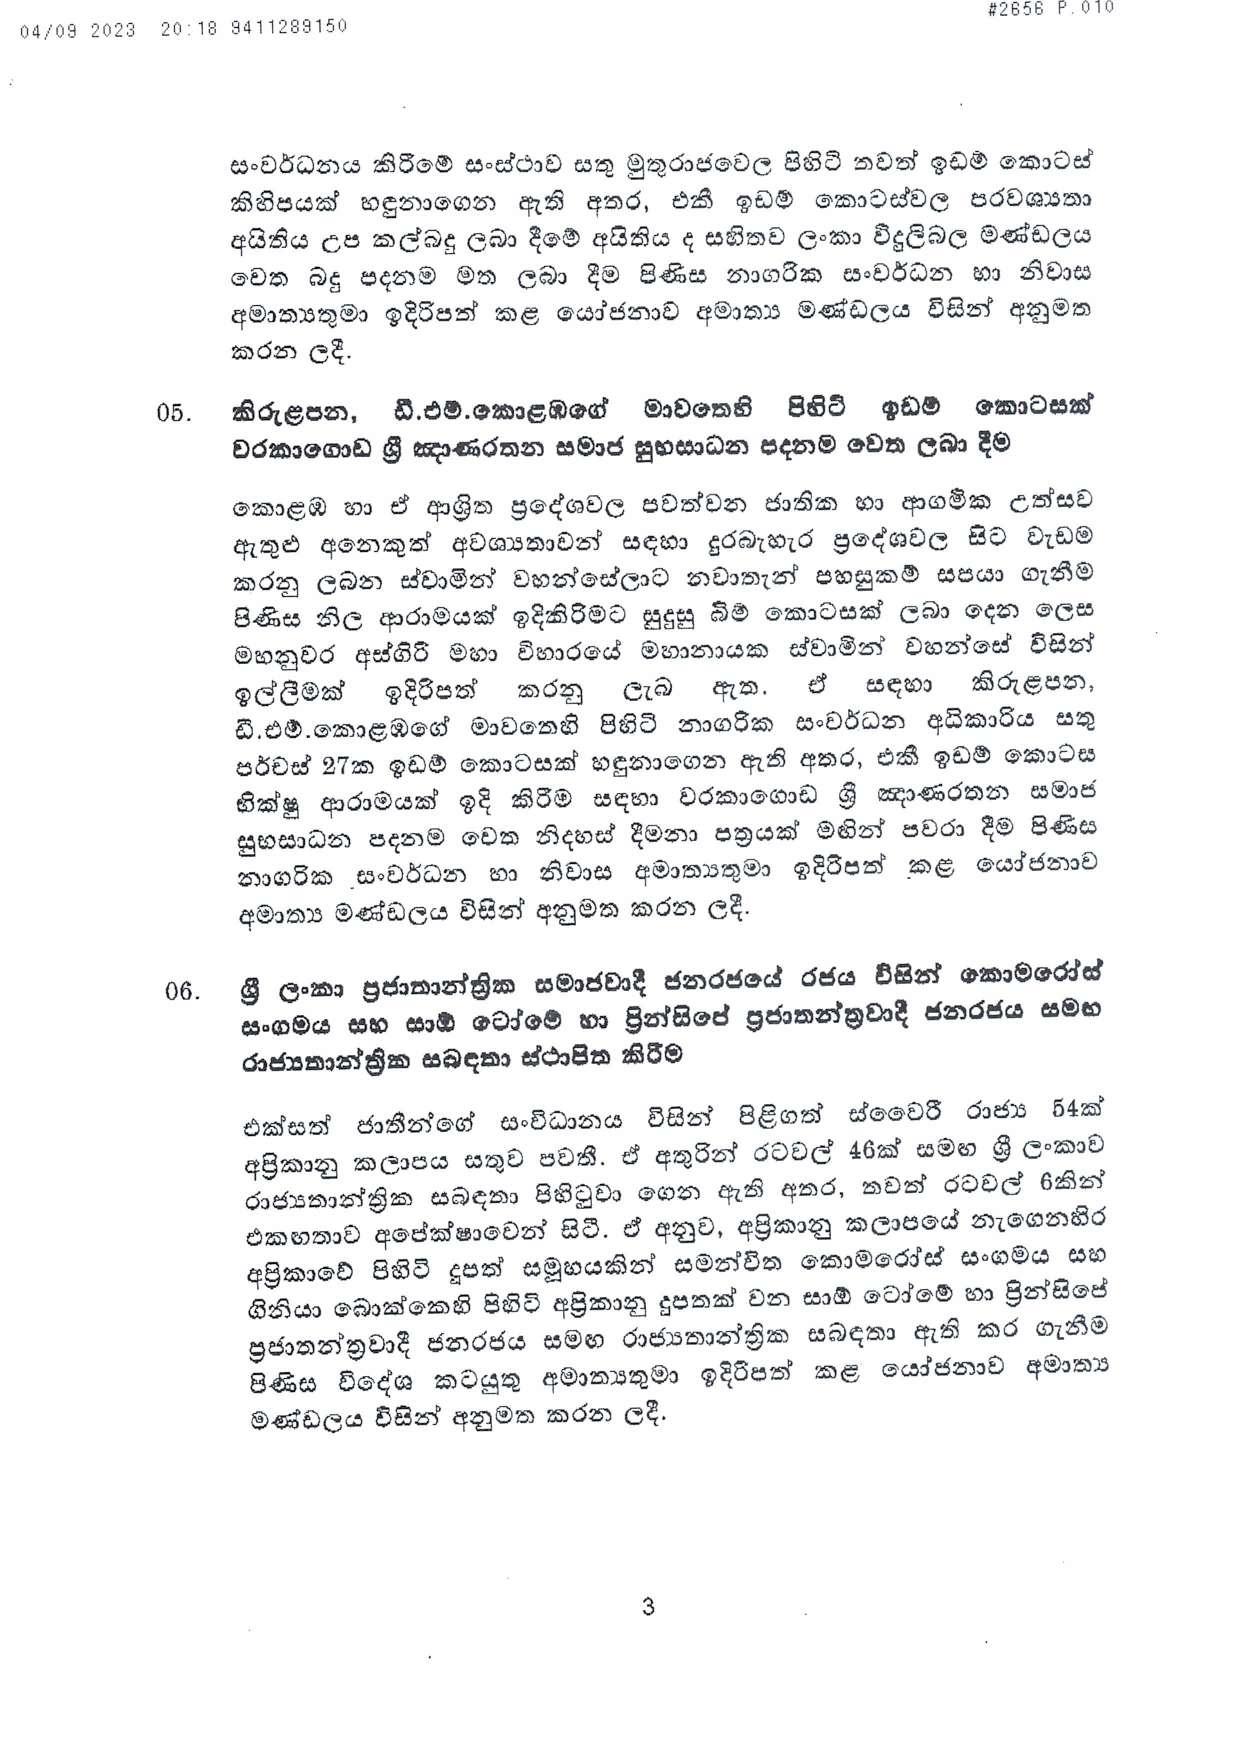 Cabinet Decision on 04.09.2023 page 003